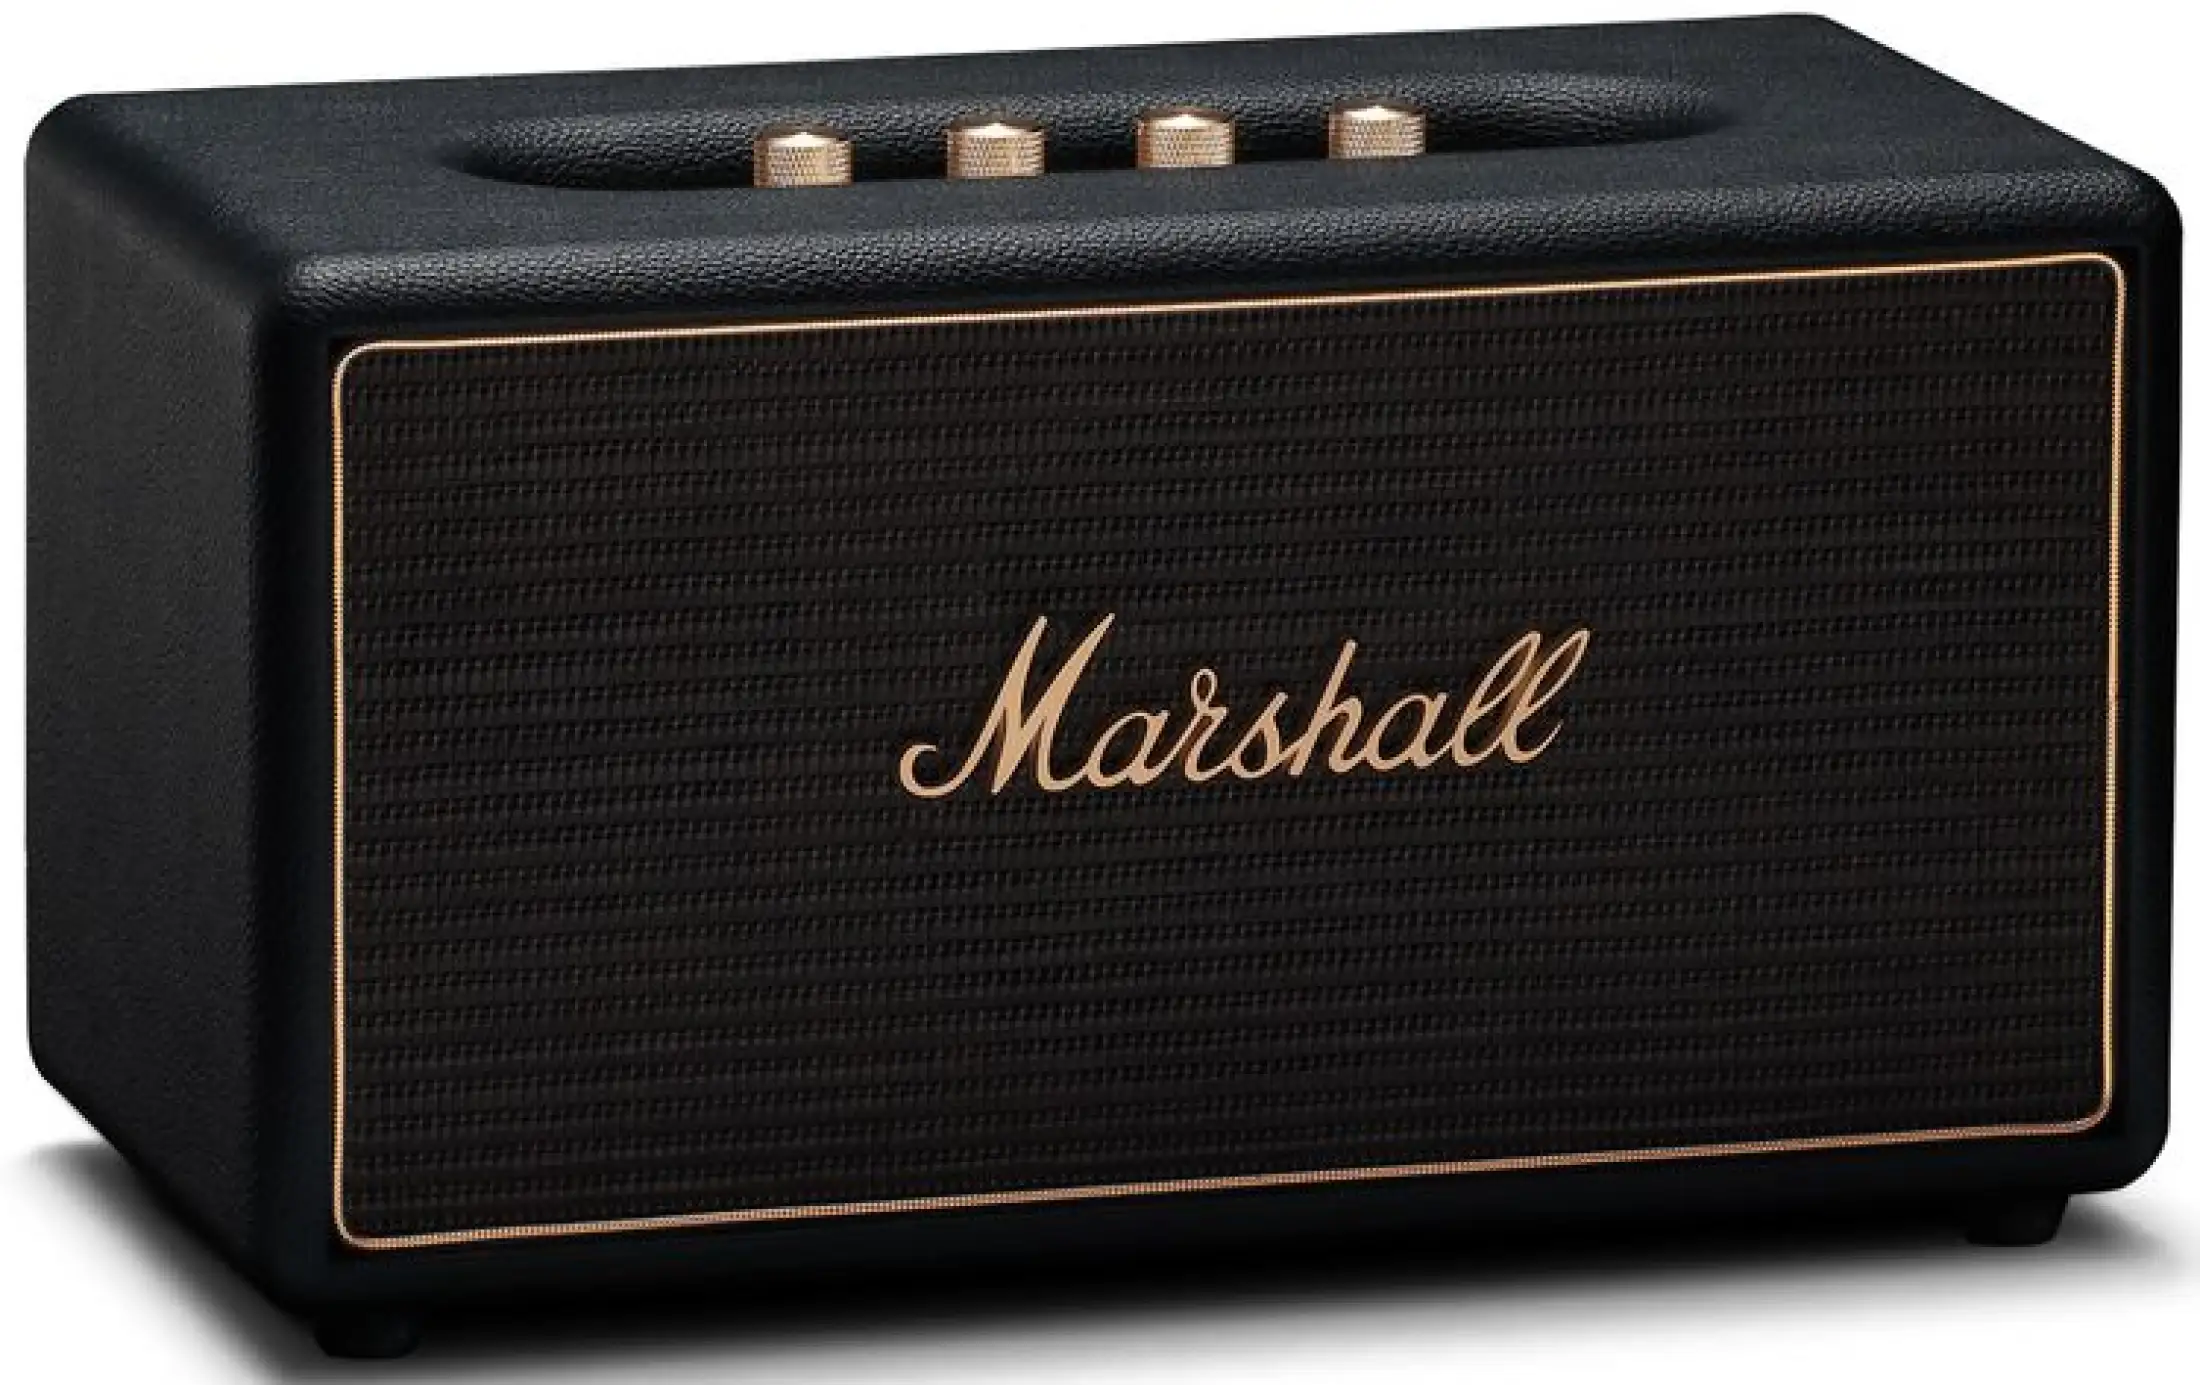 Marshall ACCS-10175 Stanmore Multiroom Chromecast Built-in, Spotify Co – JG  Superstore